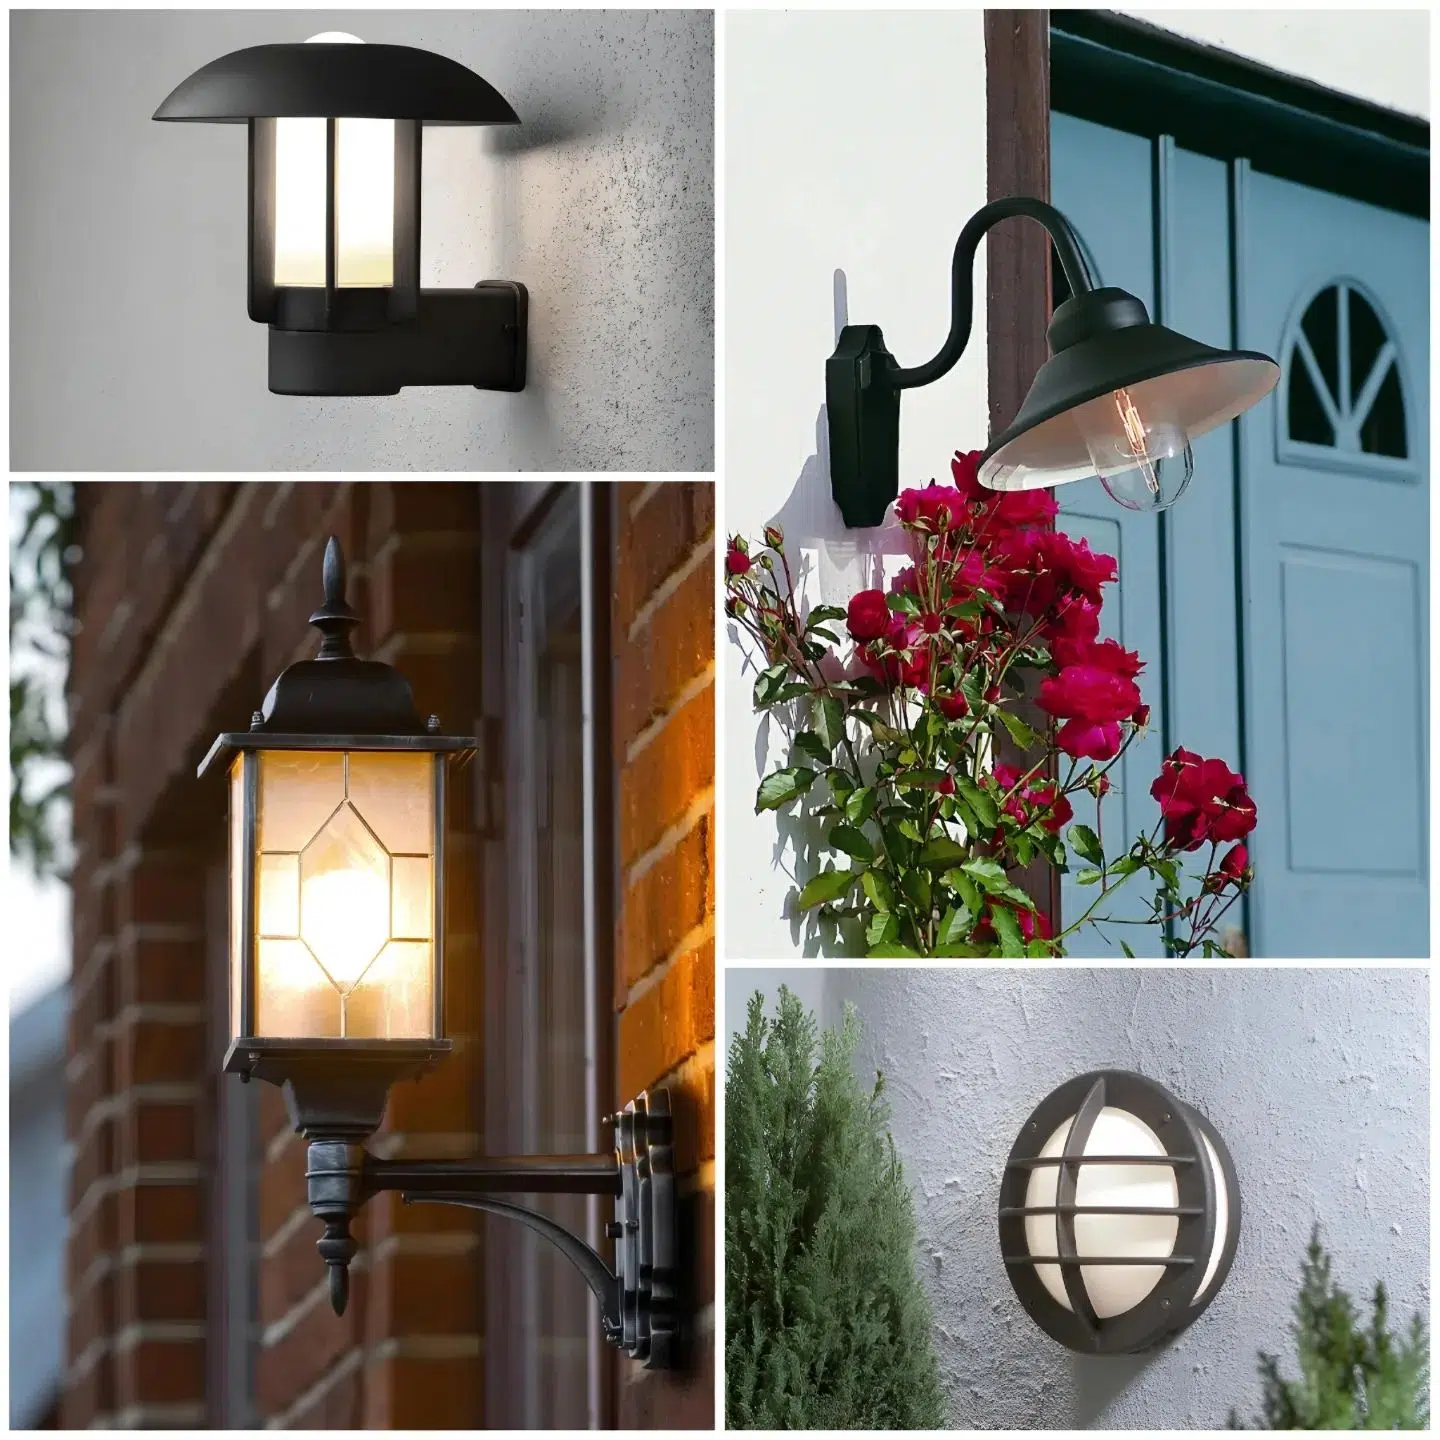 Visit stillorgandecor.ie and explore our Outdoor Lighting Collection. 💡

Available for collection in-store and delivery nationwide.